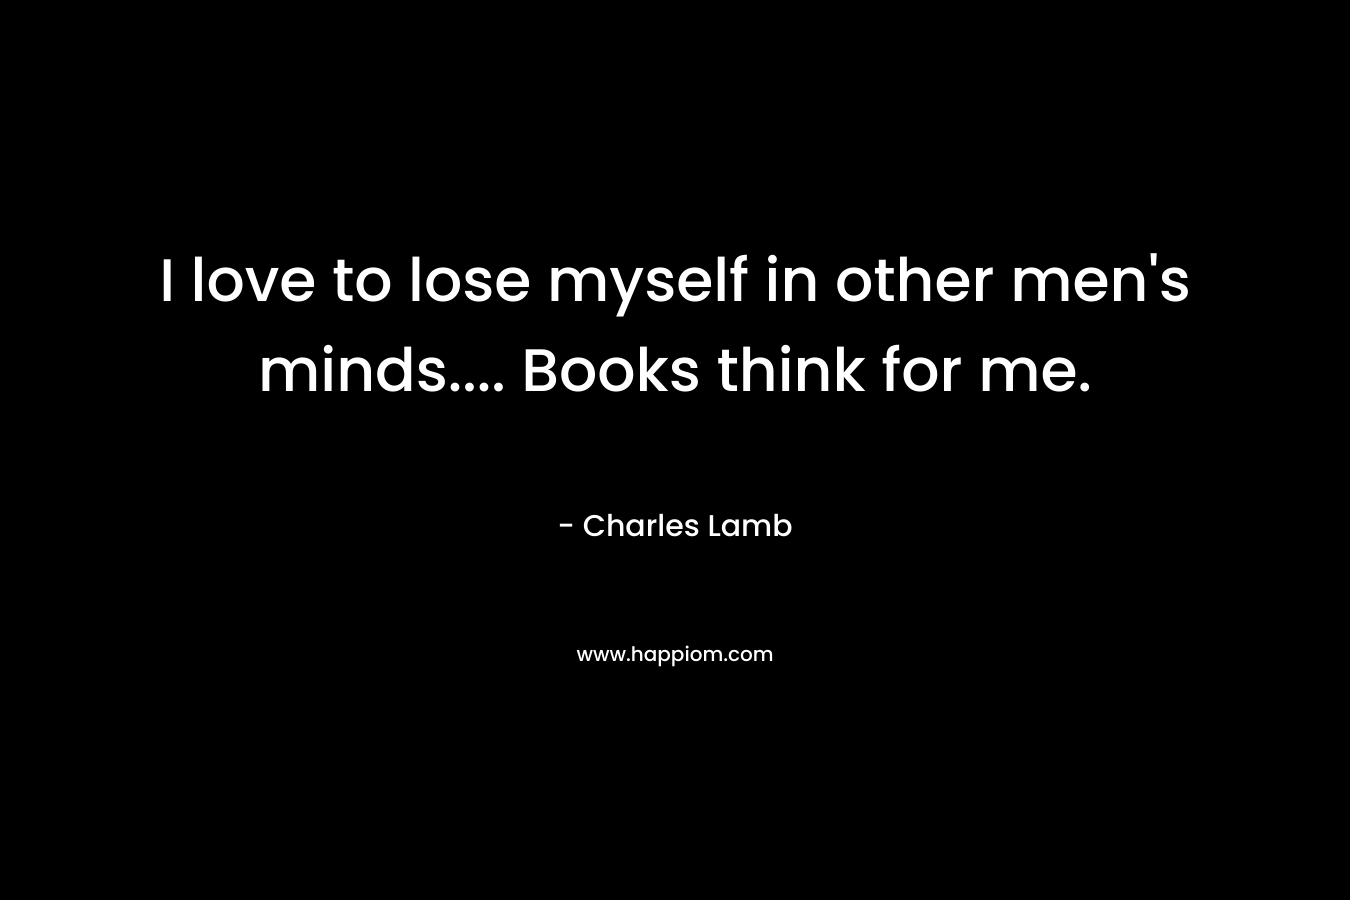 I love to lose myself in other men's minds.... Books think for me.